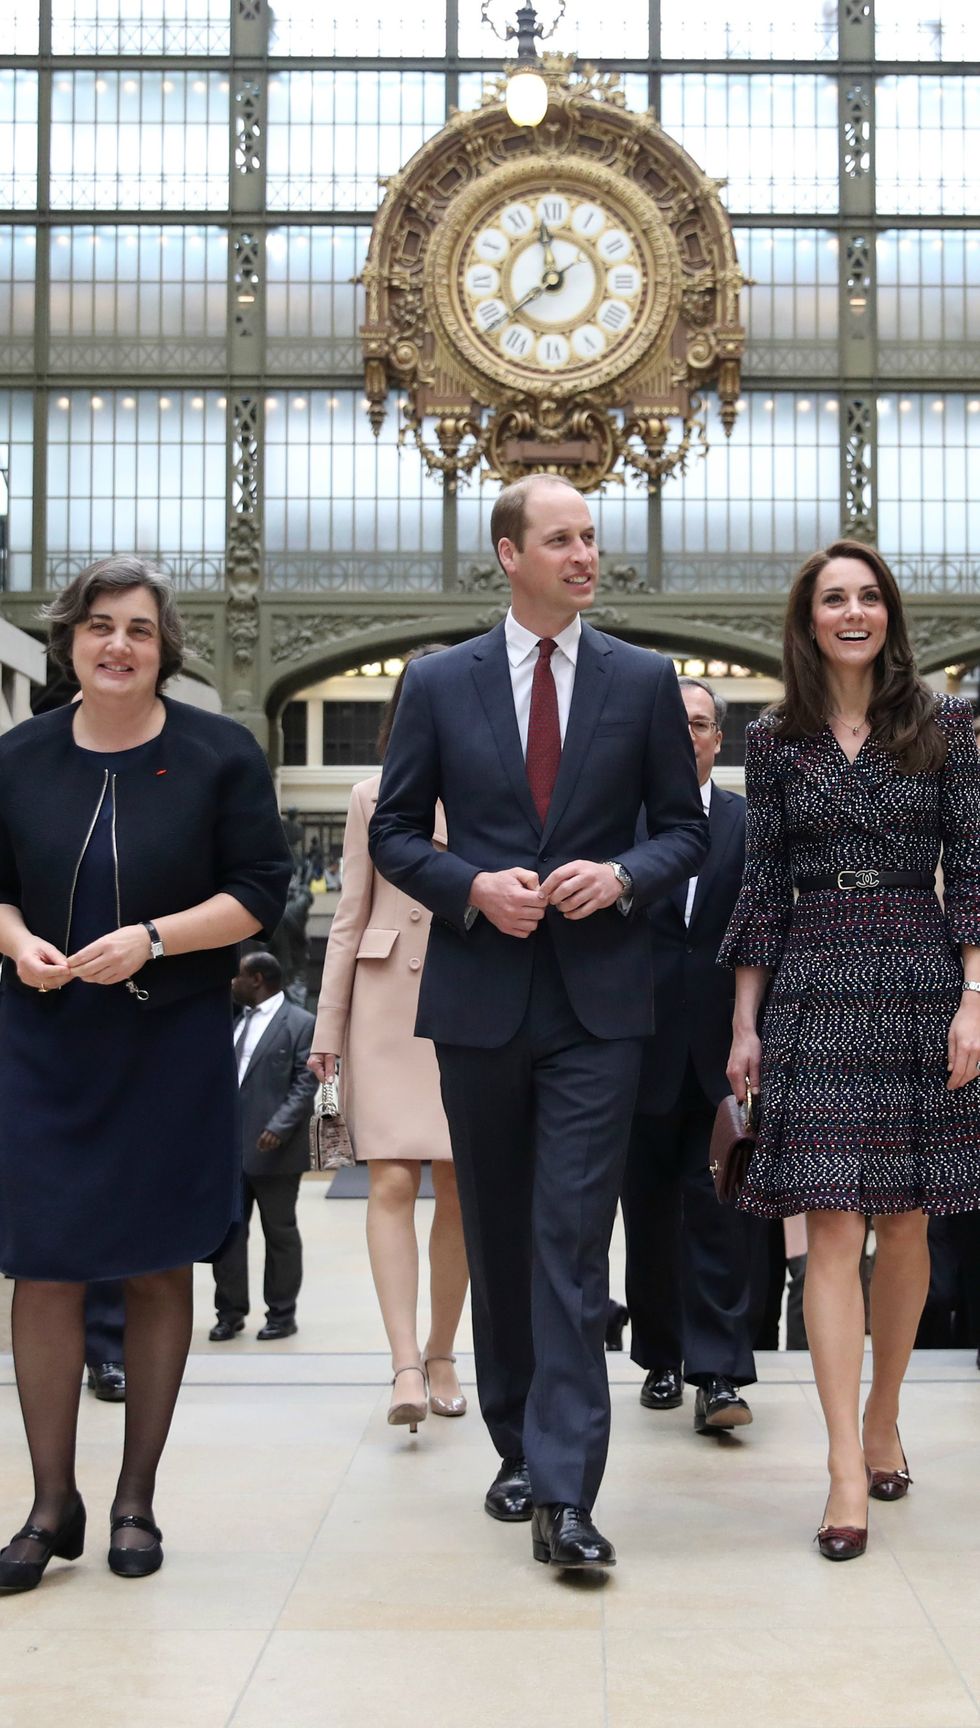 The Duke and Duchess of Cambridge - Kate and William's - royal visit to Paris